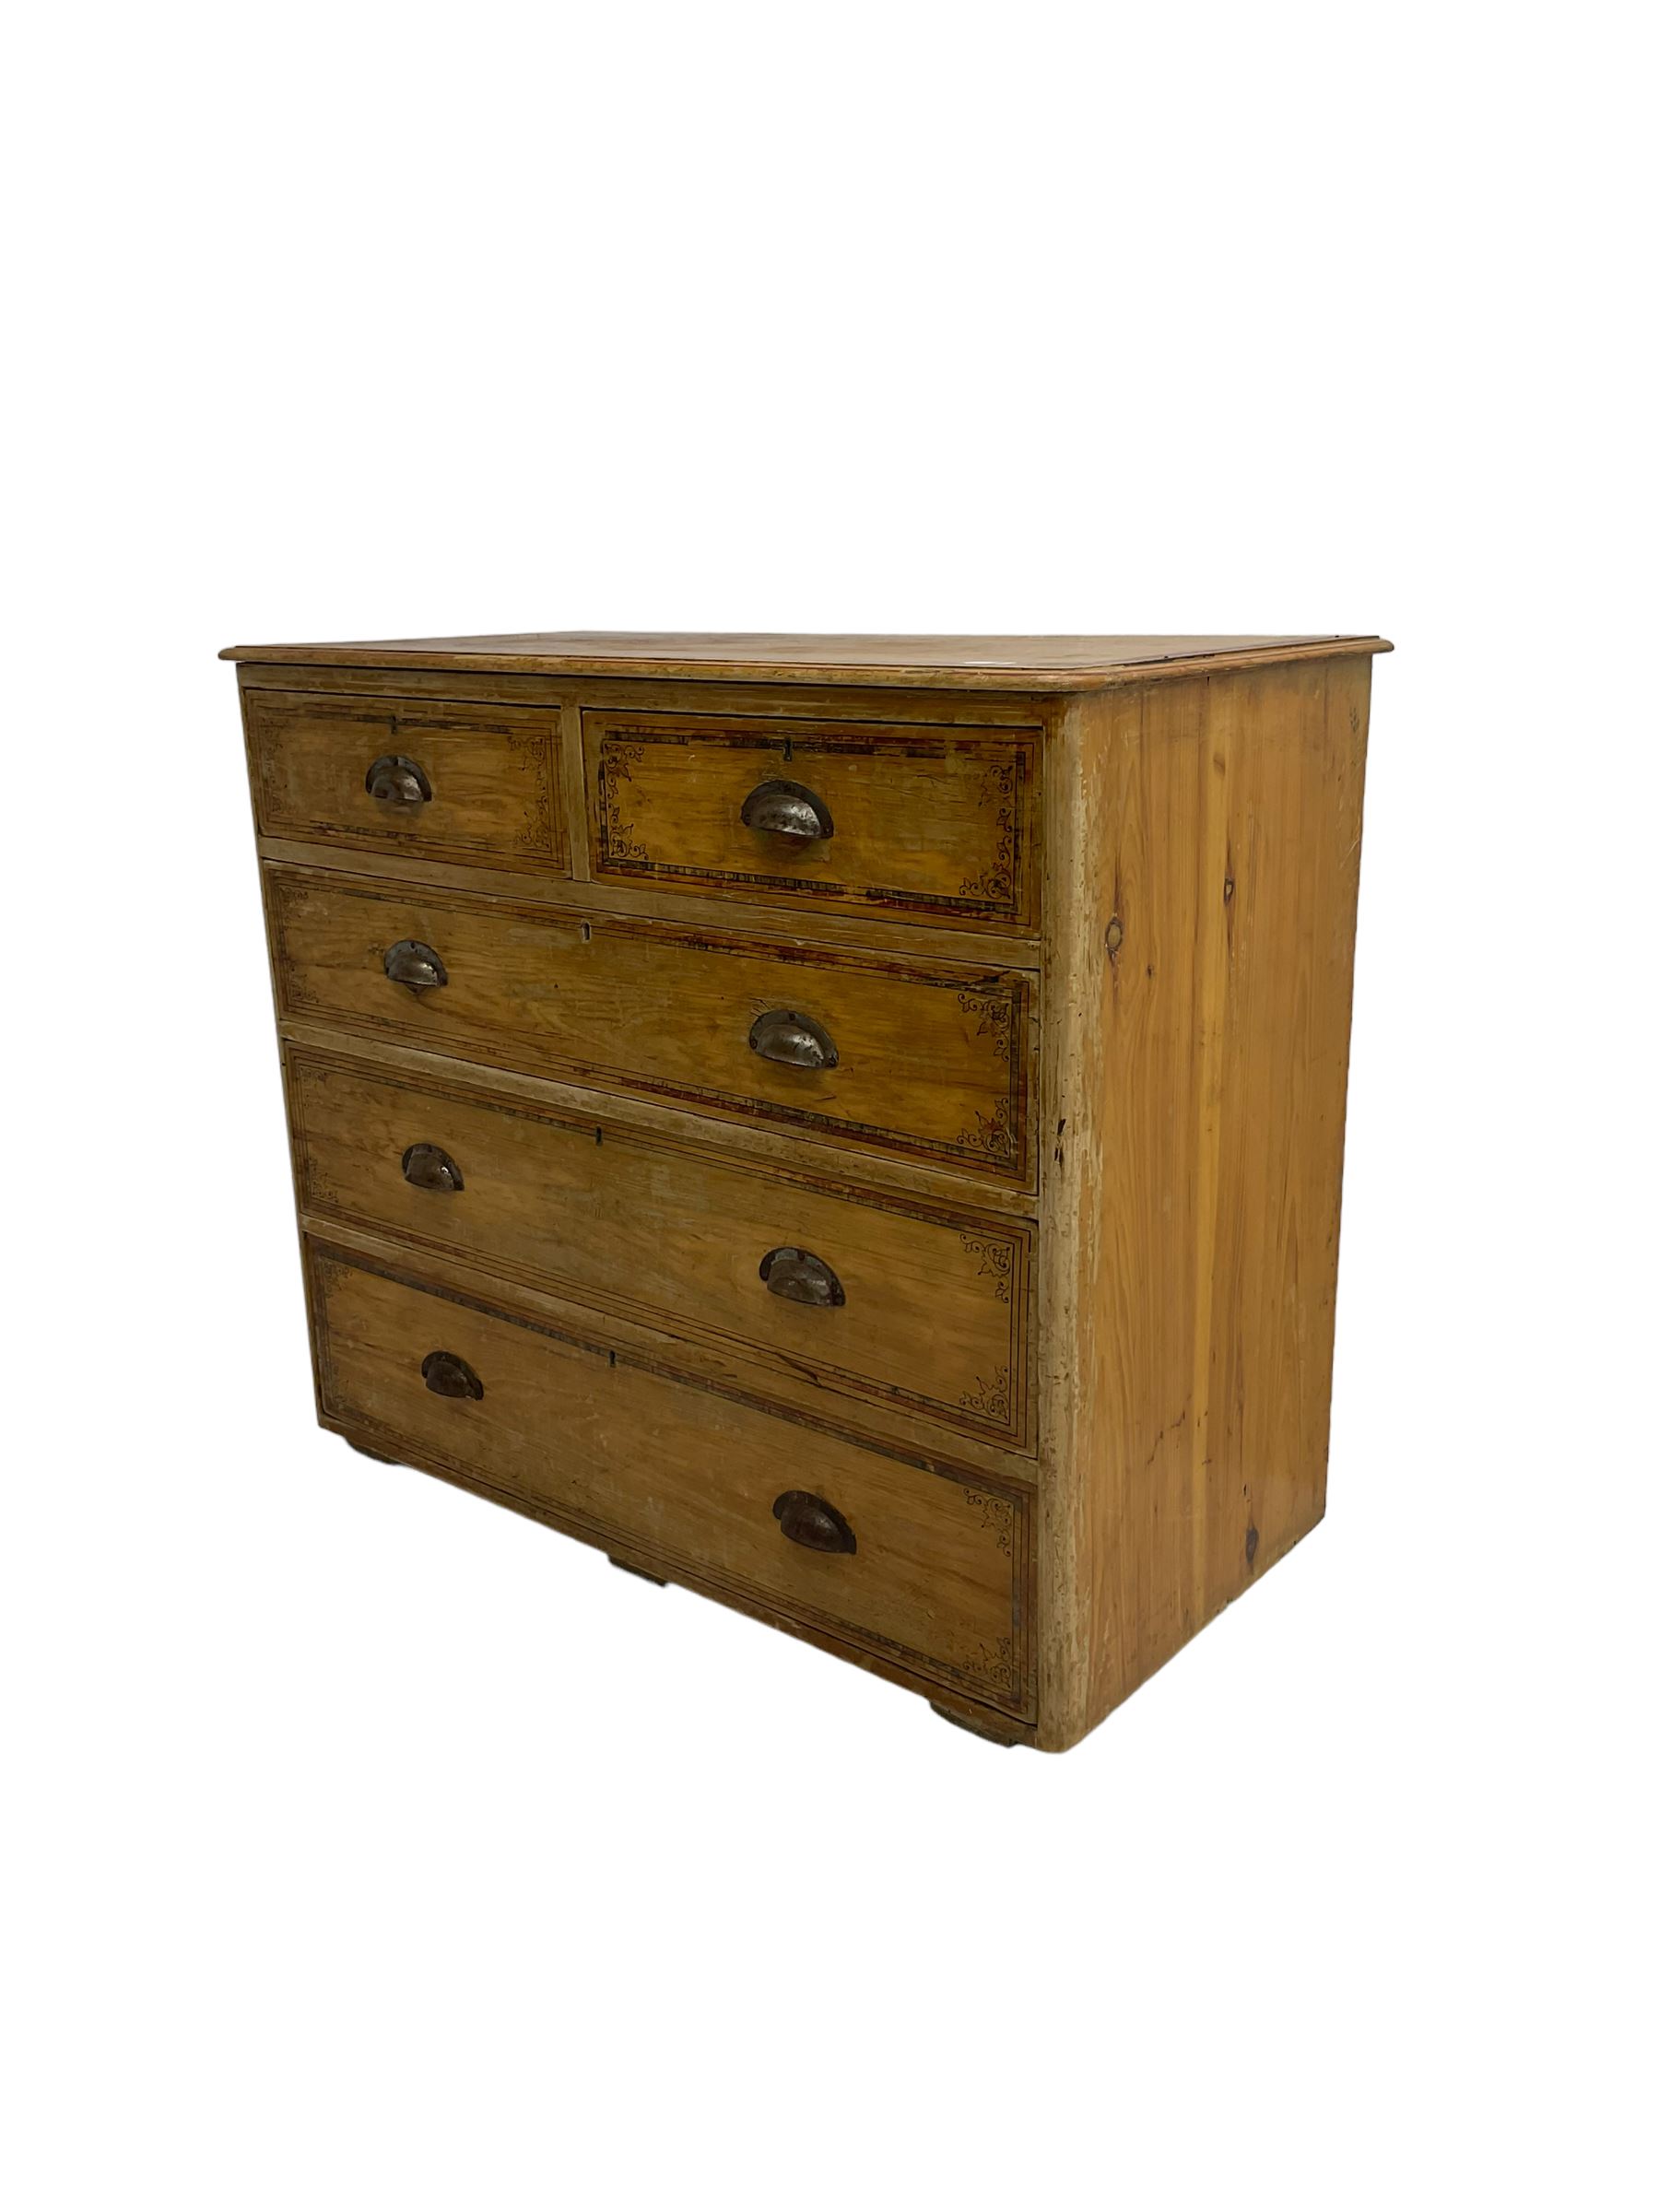 Late 19th century painted pine chest - Image 5 of 6